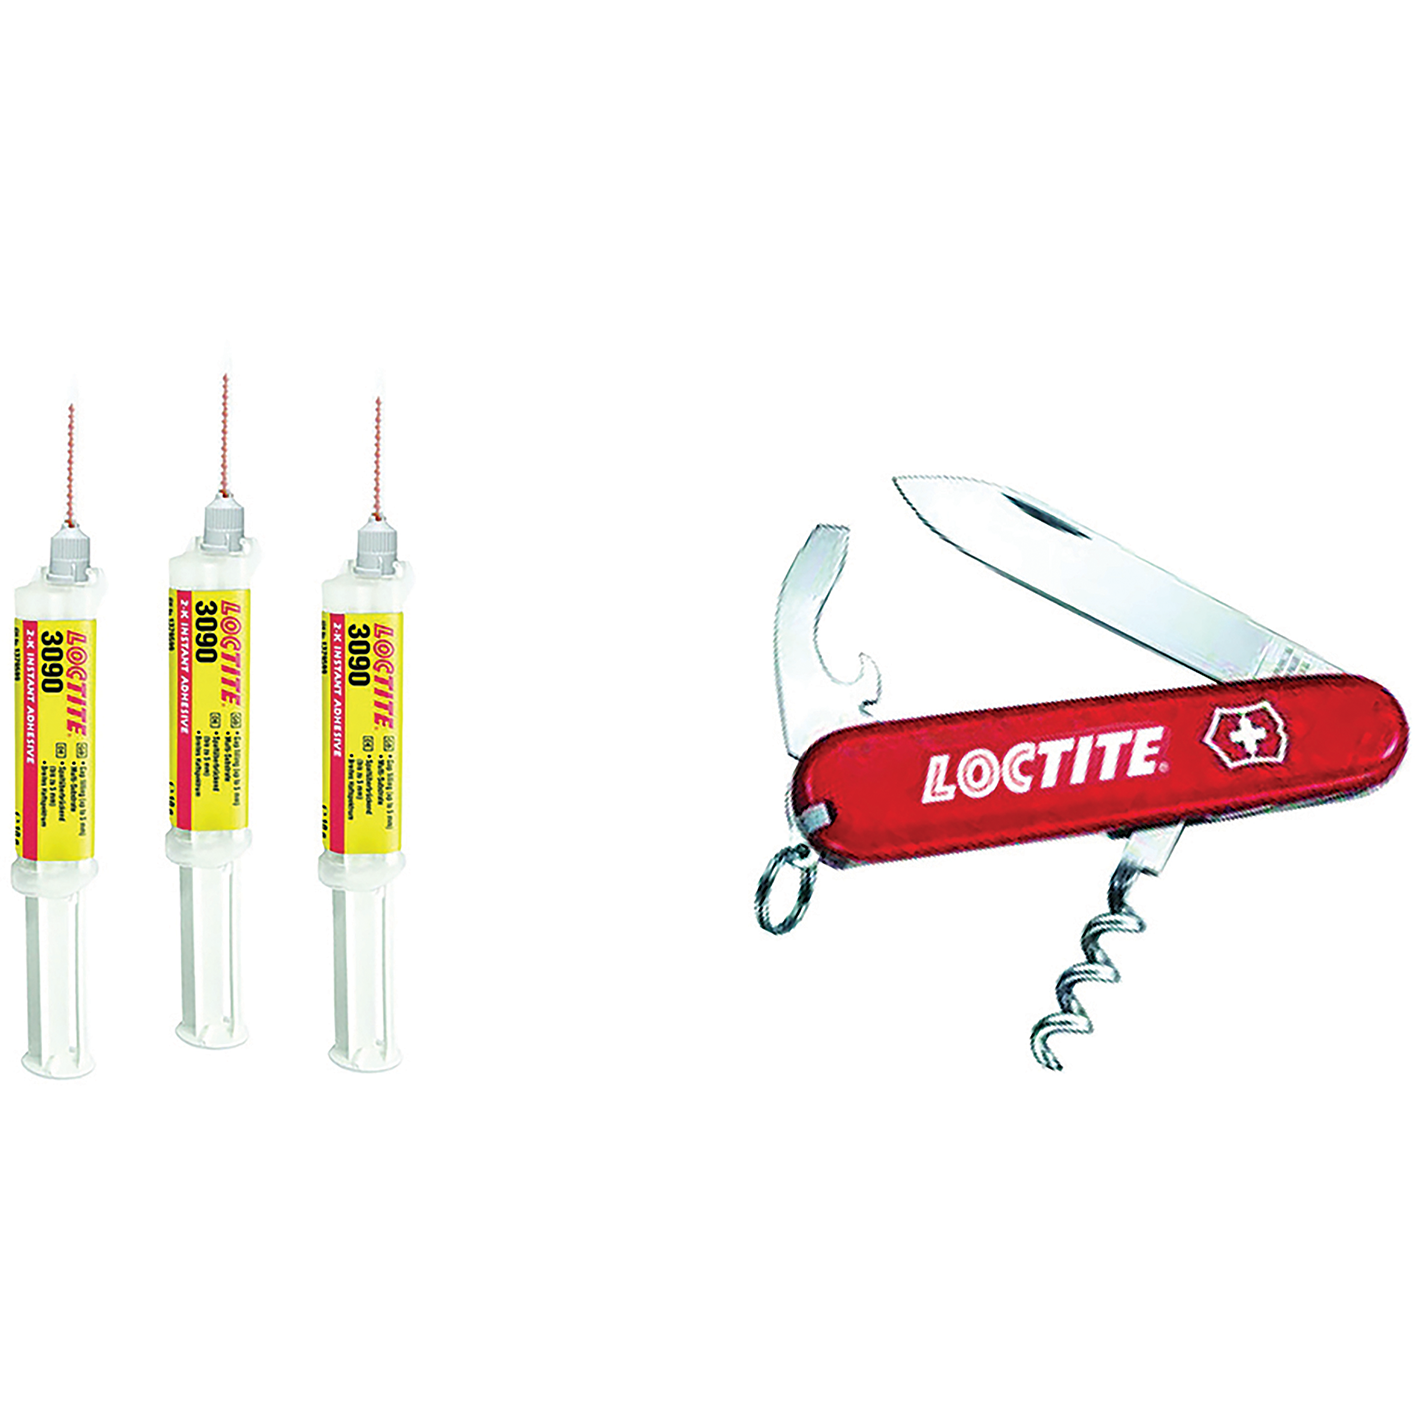 LOCTITE3090 10G PROMO PK OF 3 C/W SWISS ARMY KNIFE